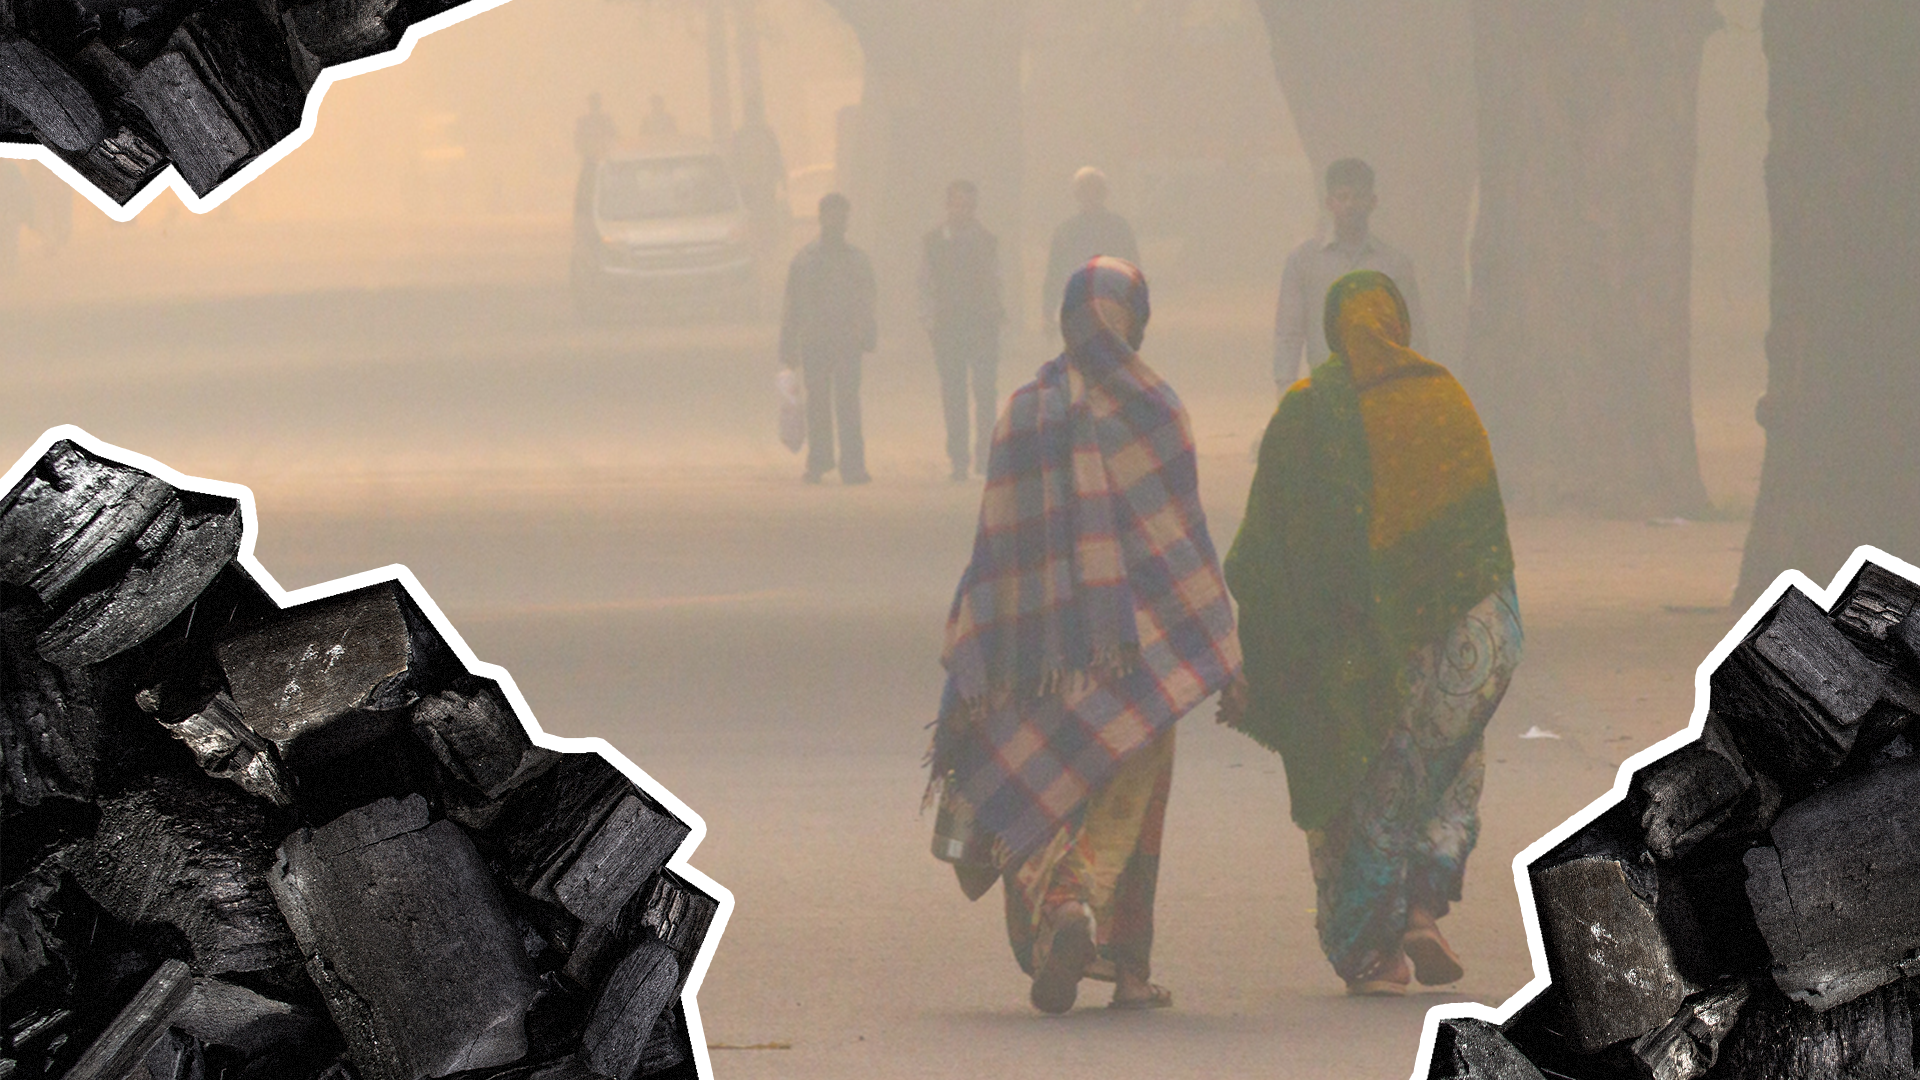 A graphic showing two women walking in smog